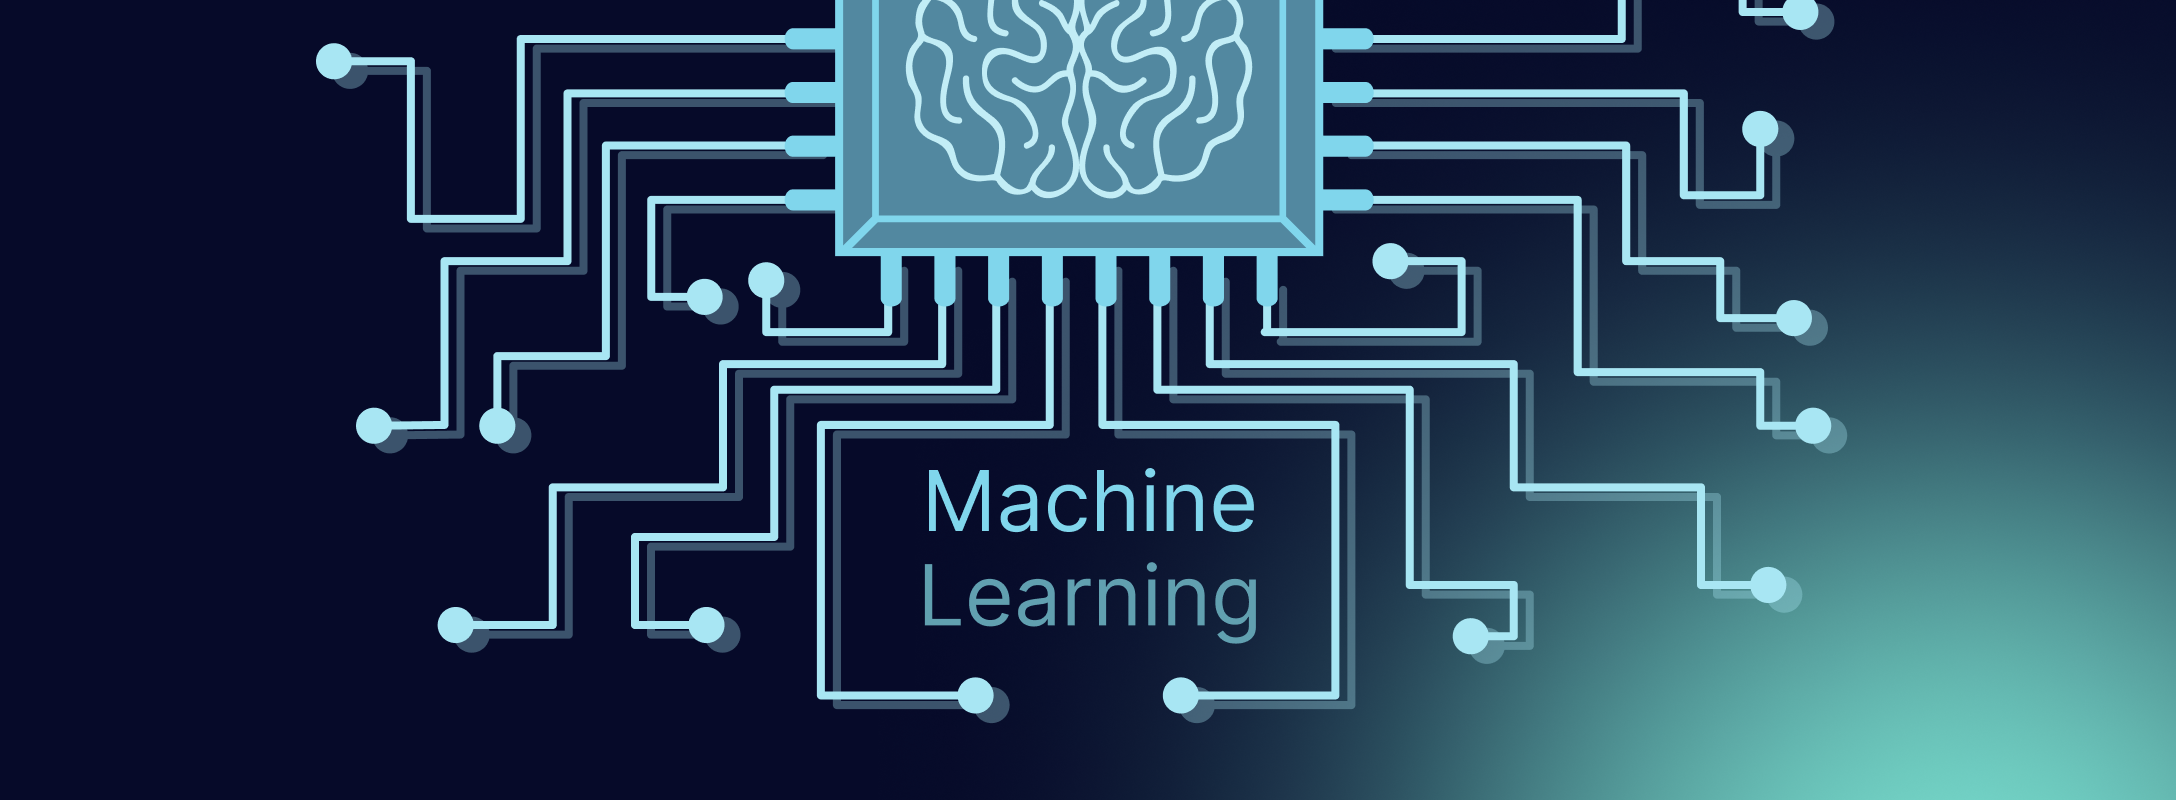 Banner image for Machine Learning App Development Company